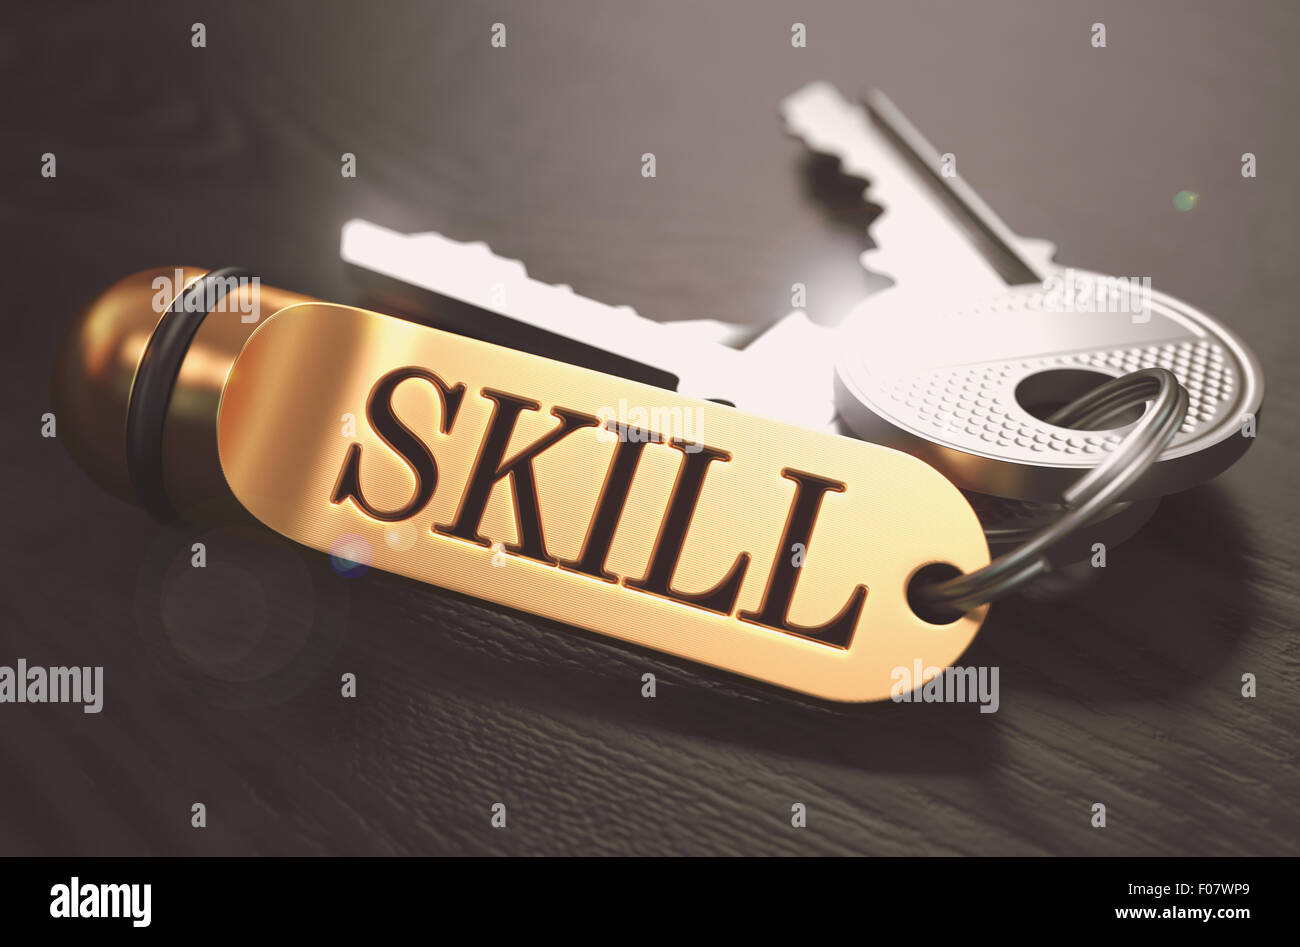 Skill - Bunch of Keys with Text on Golden Keychain. Stock Photo